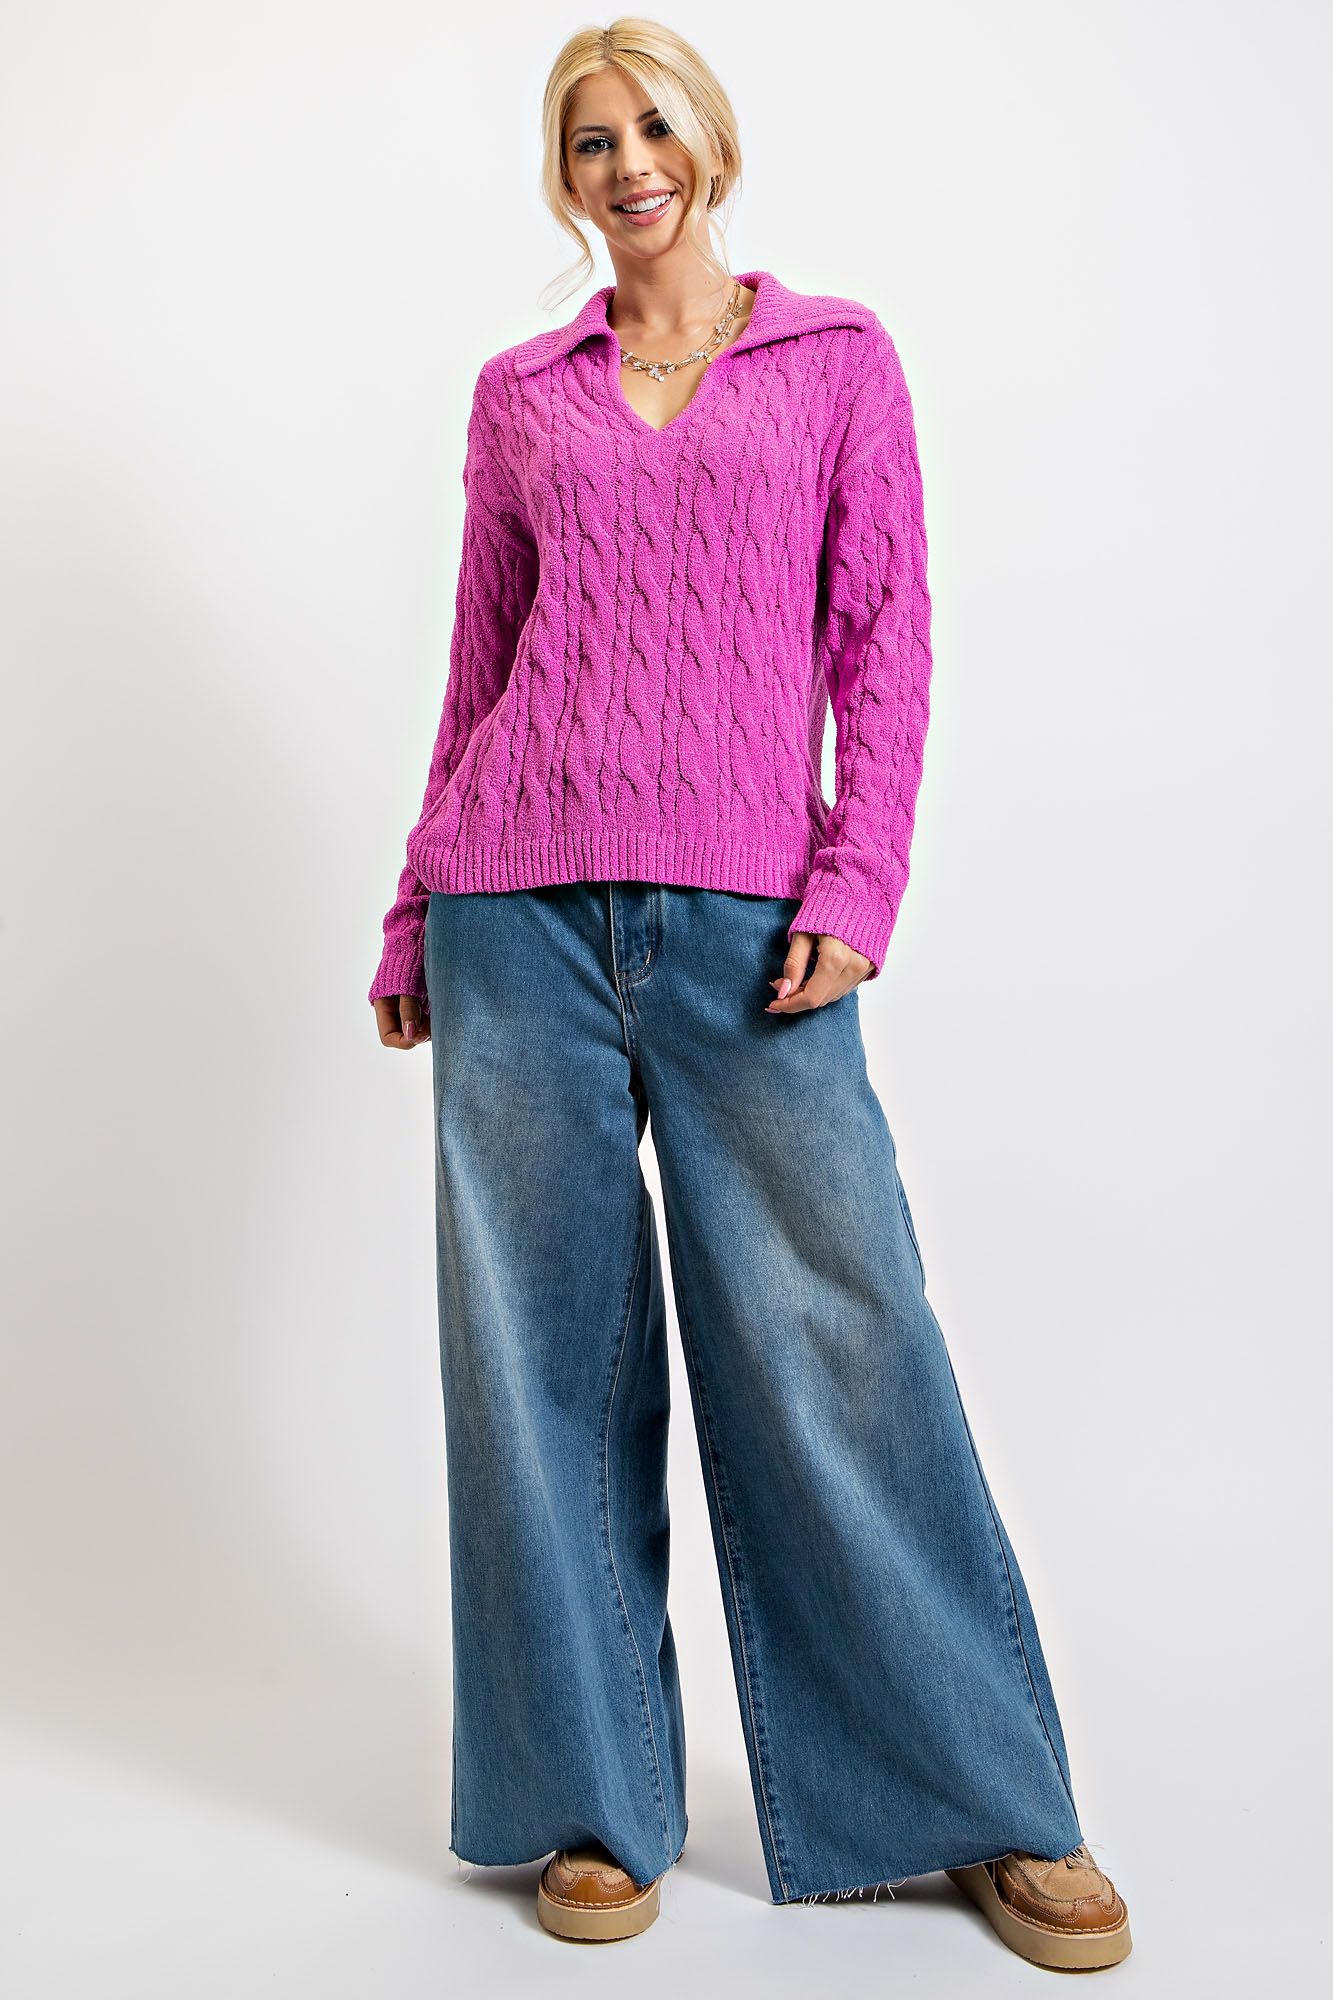 Magenta Pink Cable Knitted Sweater